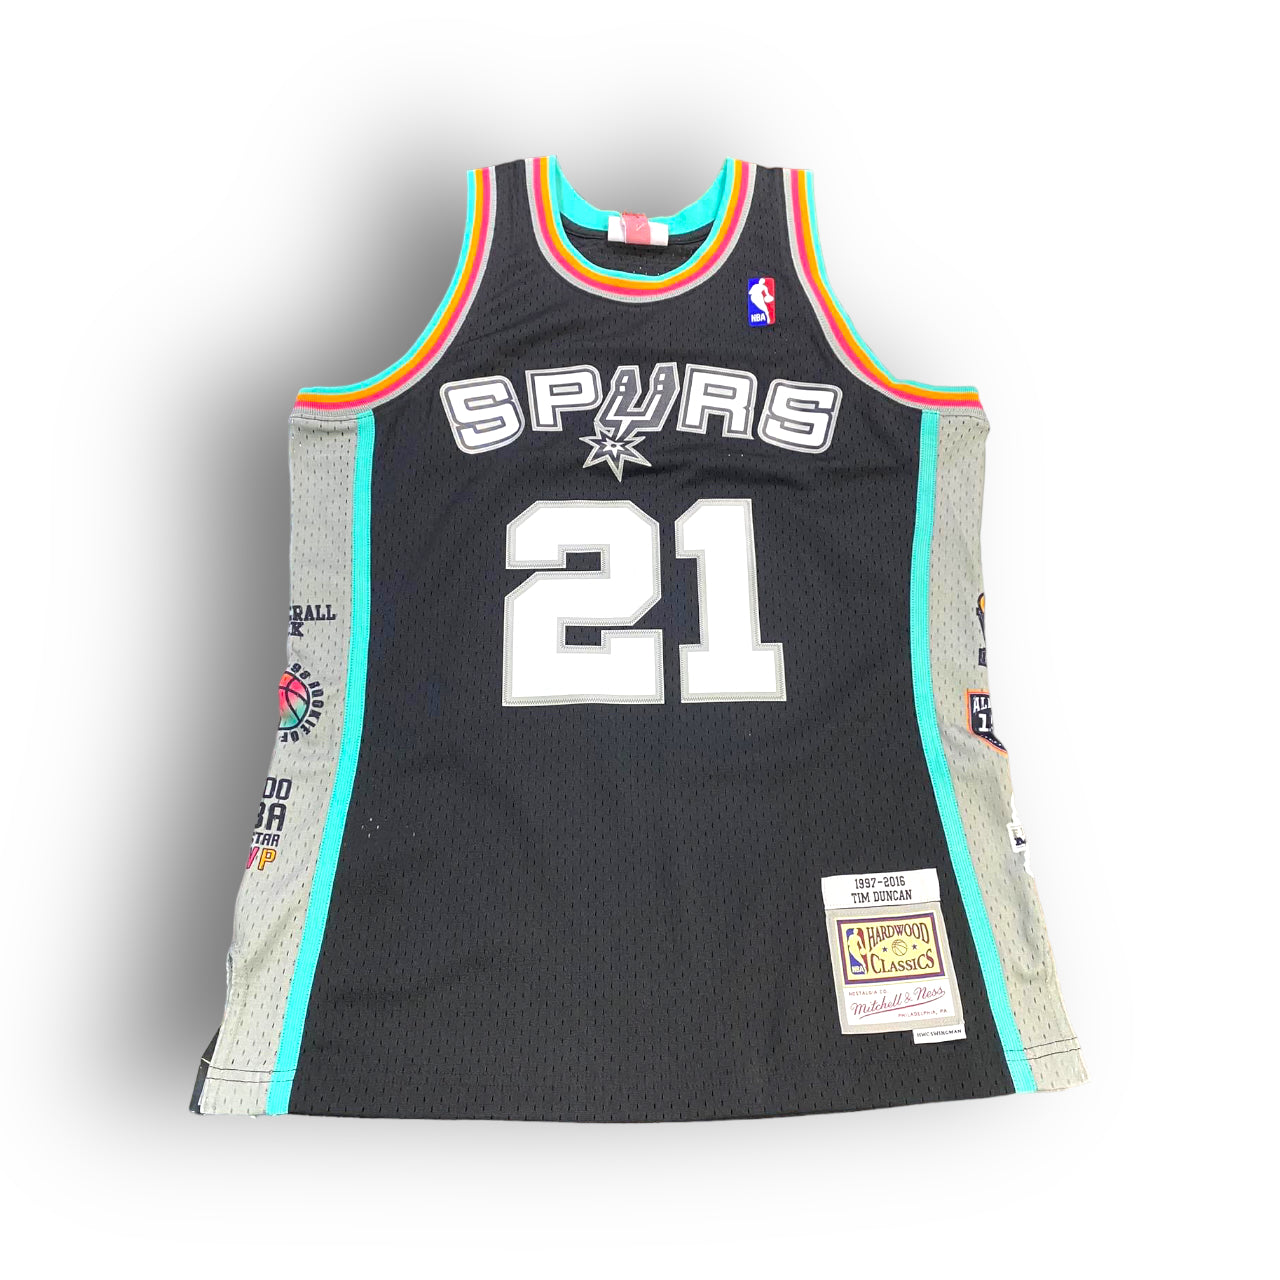 Tim Duncan San Antonio Spurs Hall of Fame Player Special Edition Mitchell & Ness Swingman Jersey - Black White Green